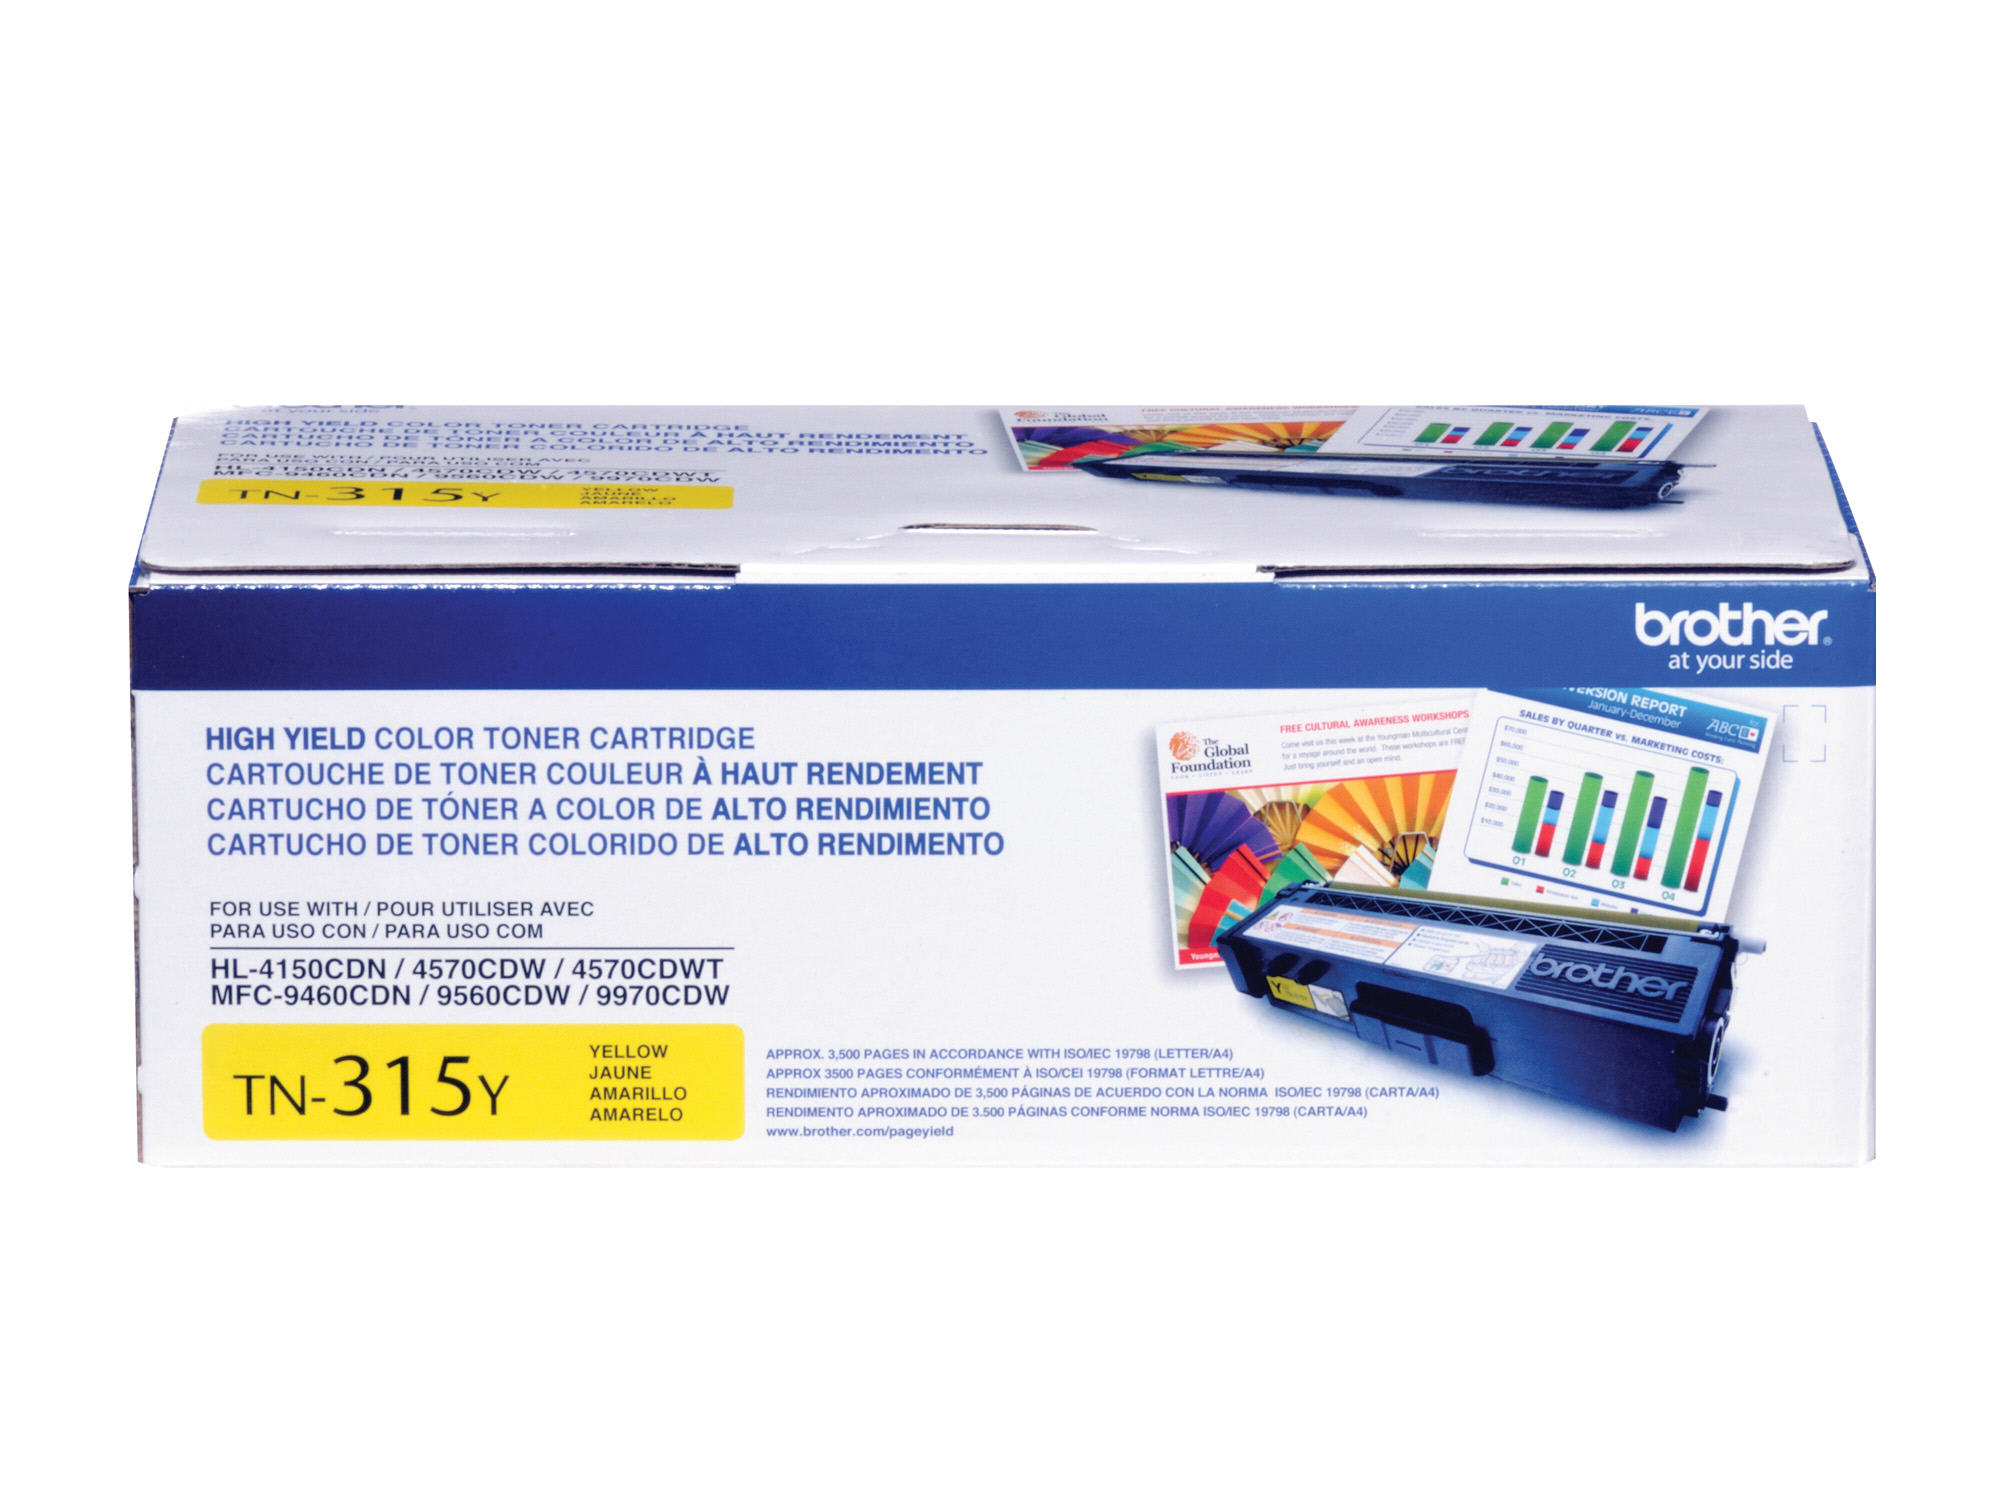 TN315Y HIGH YIELD TONER CART YELLOW High Yield Yellow Toner Cartridge (yields approx. 3,500 pages in accordance withISO/IEC 19798 on letter/A4 size paper) YELLOW HIGH YIELD TONER FOR HL4150CDN HL4570CDW HL4570CDWT<br />YELLOW HIGH YIELD TONER FOR MULTI 4 HL4150CDN HL4570CDW